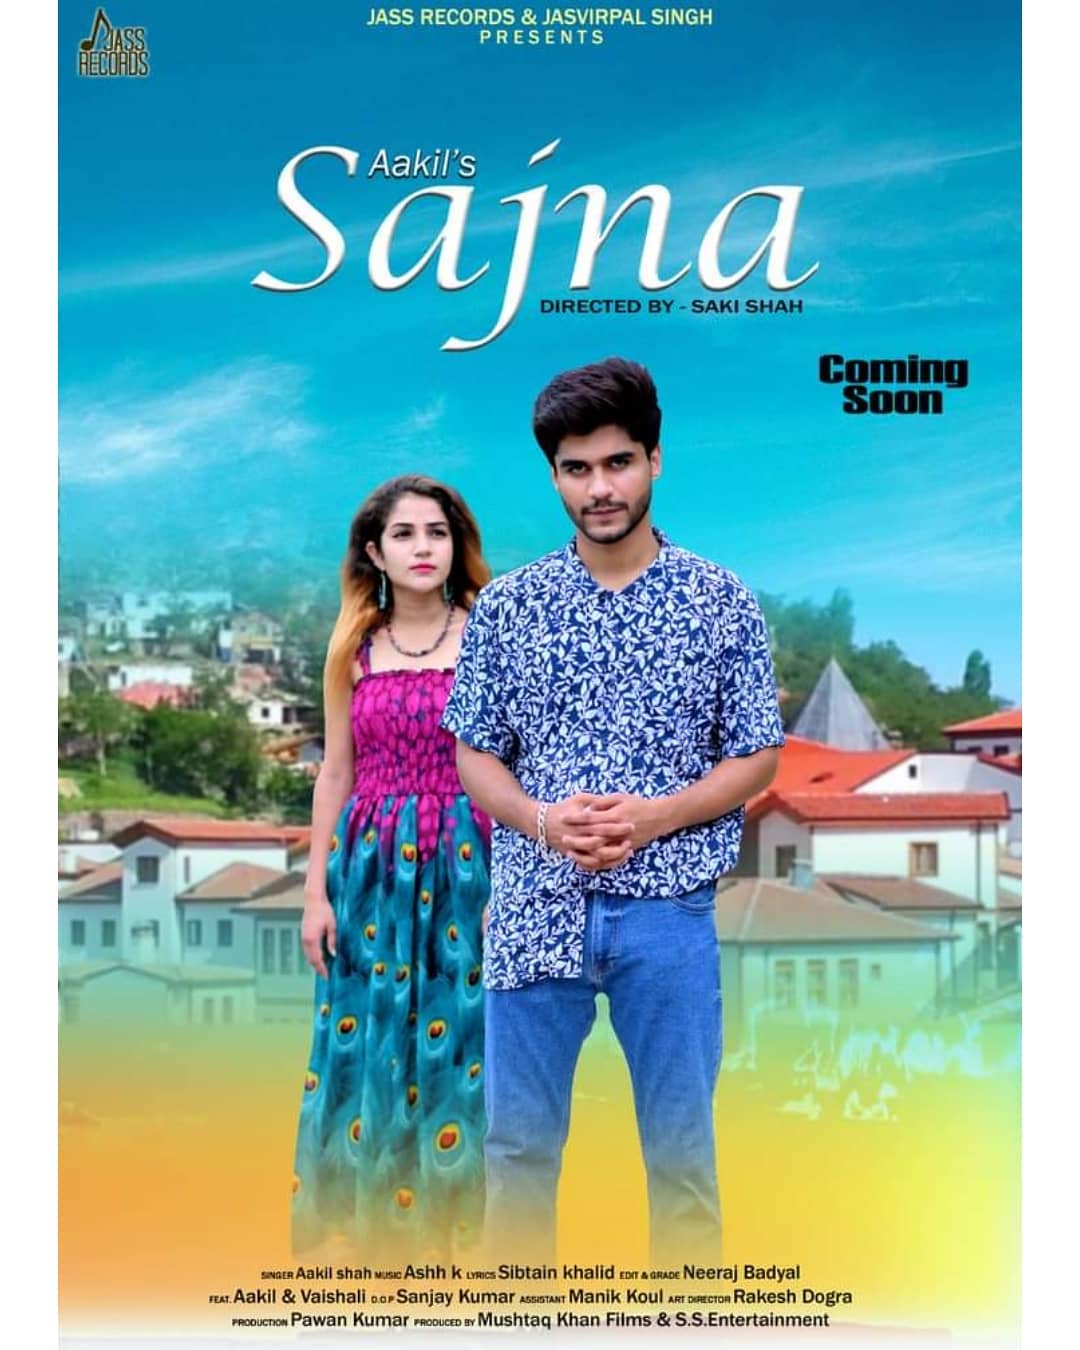 Aakil Shah New Song "SAJNA" Lyrics In English, Whatsapp Status, And Mp3 Downloads!